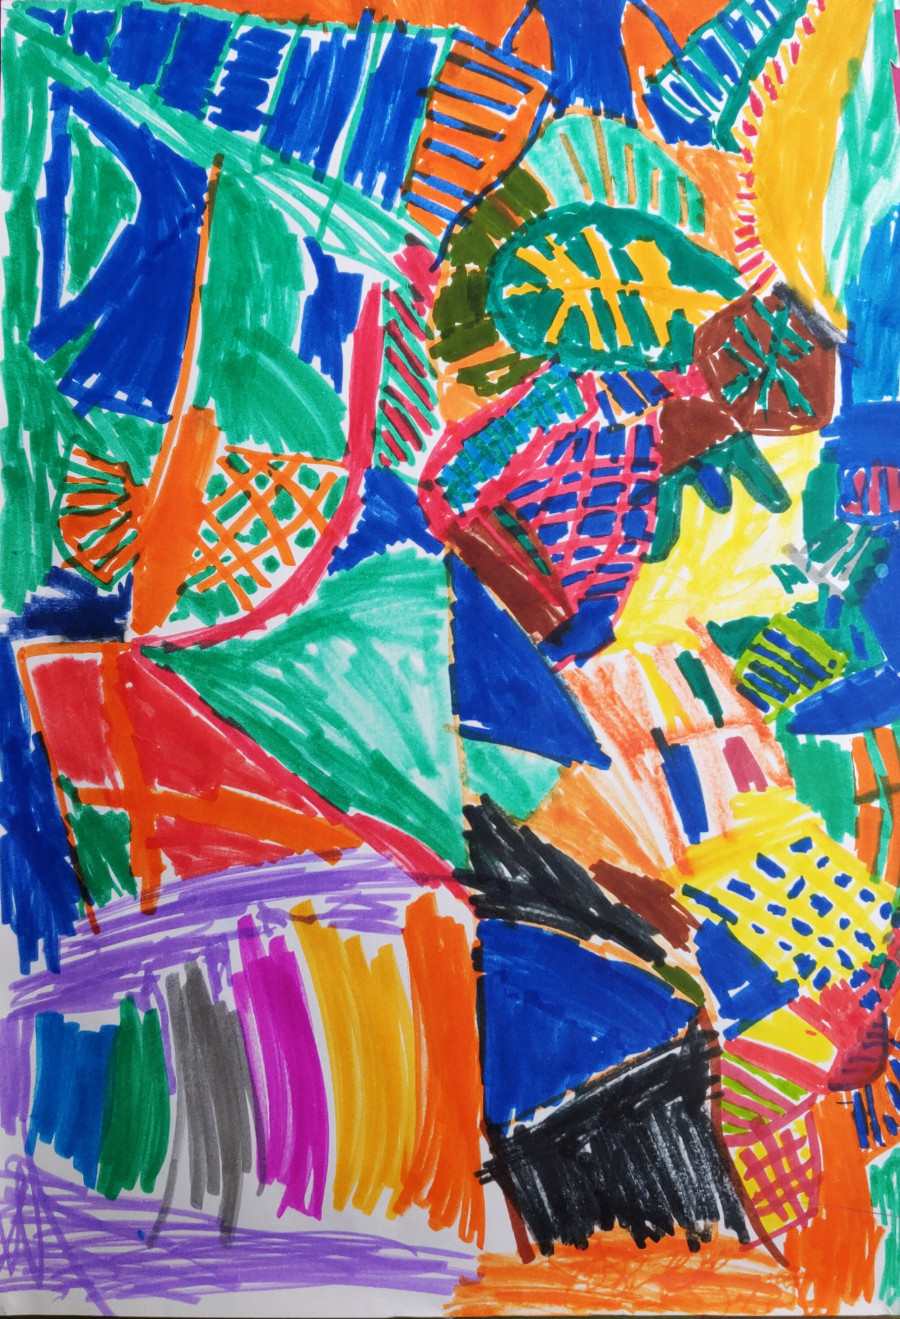 'Abstract' by Pádraic (5) from Dublin